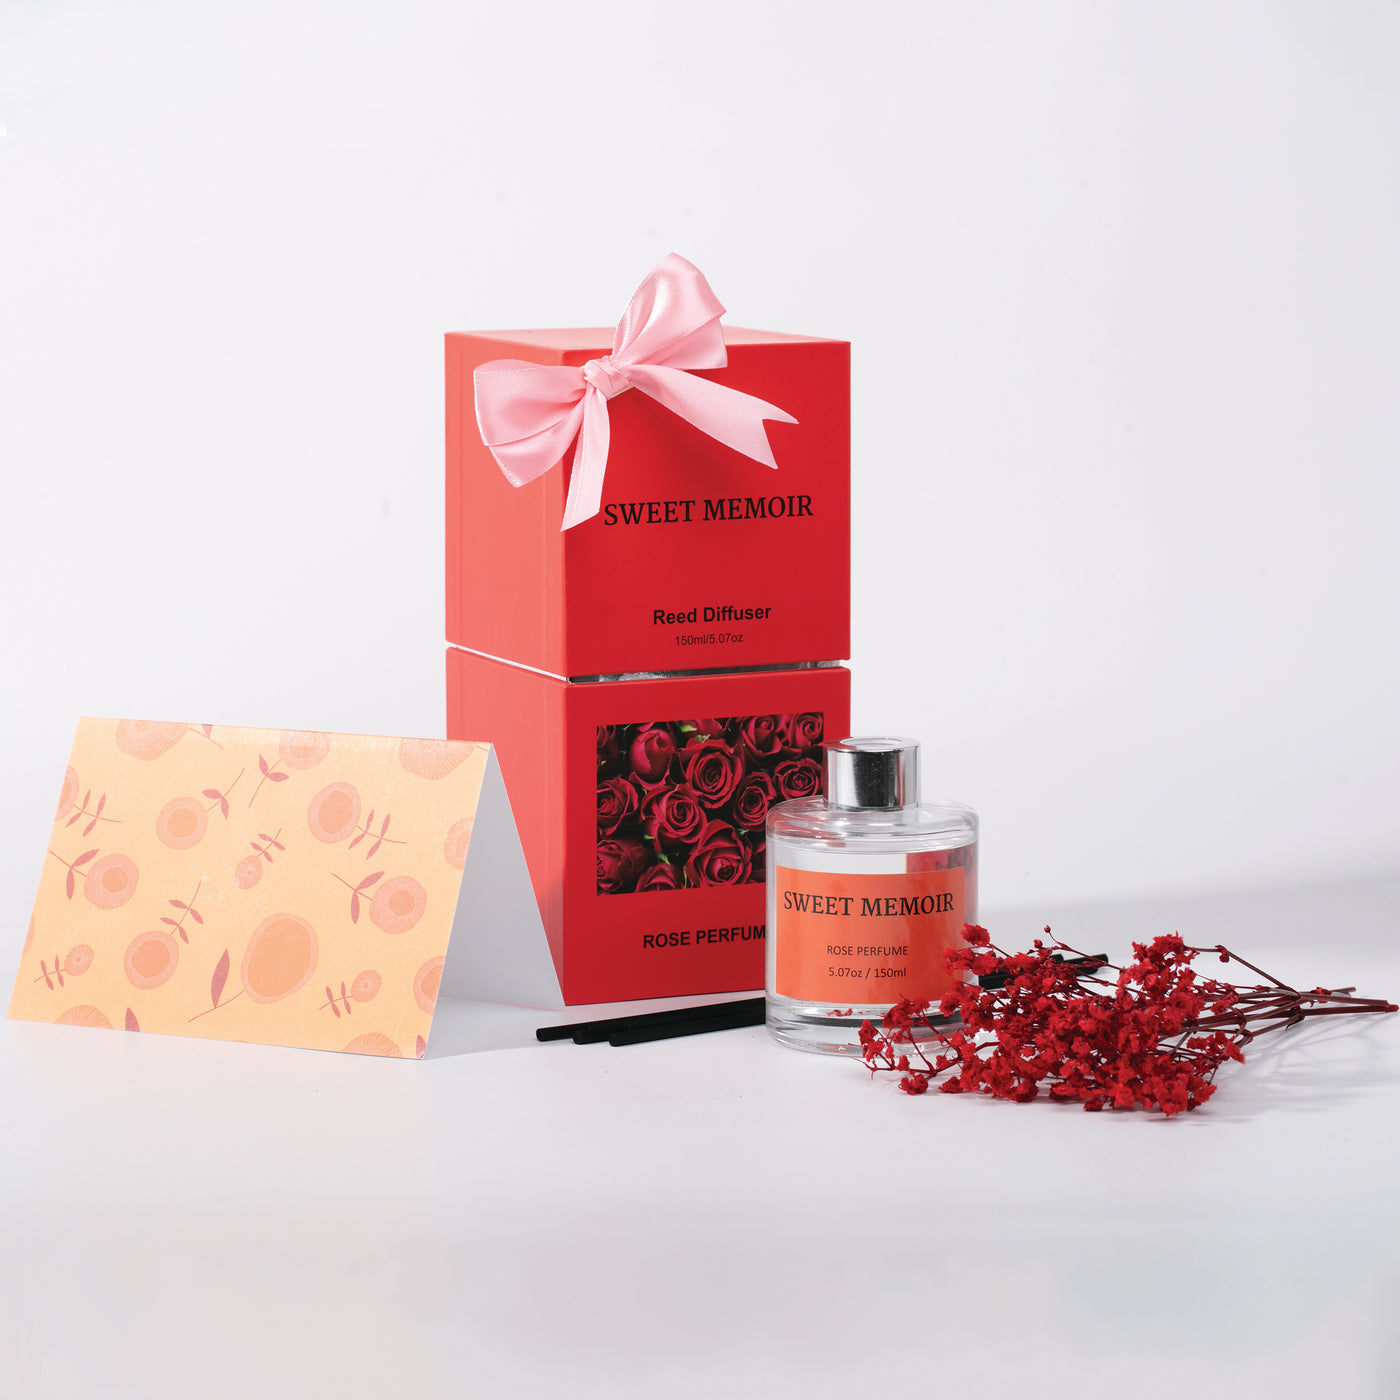 Sweet Memoir gift set featuring reed diffuser and essential oils in a festive red box with a pink ribbon, perfect for gifting.